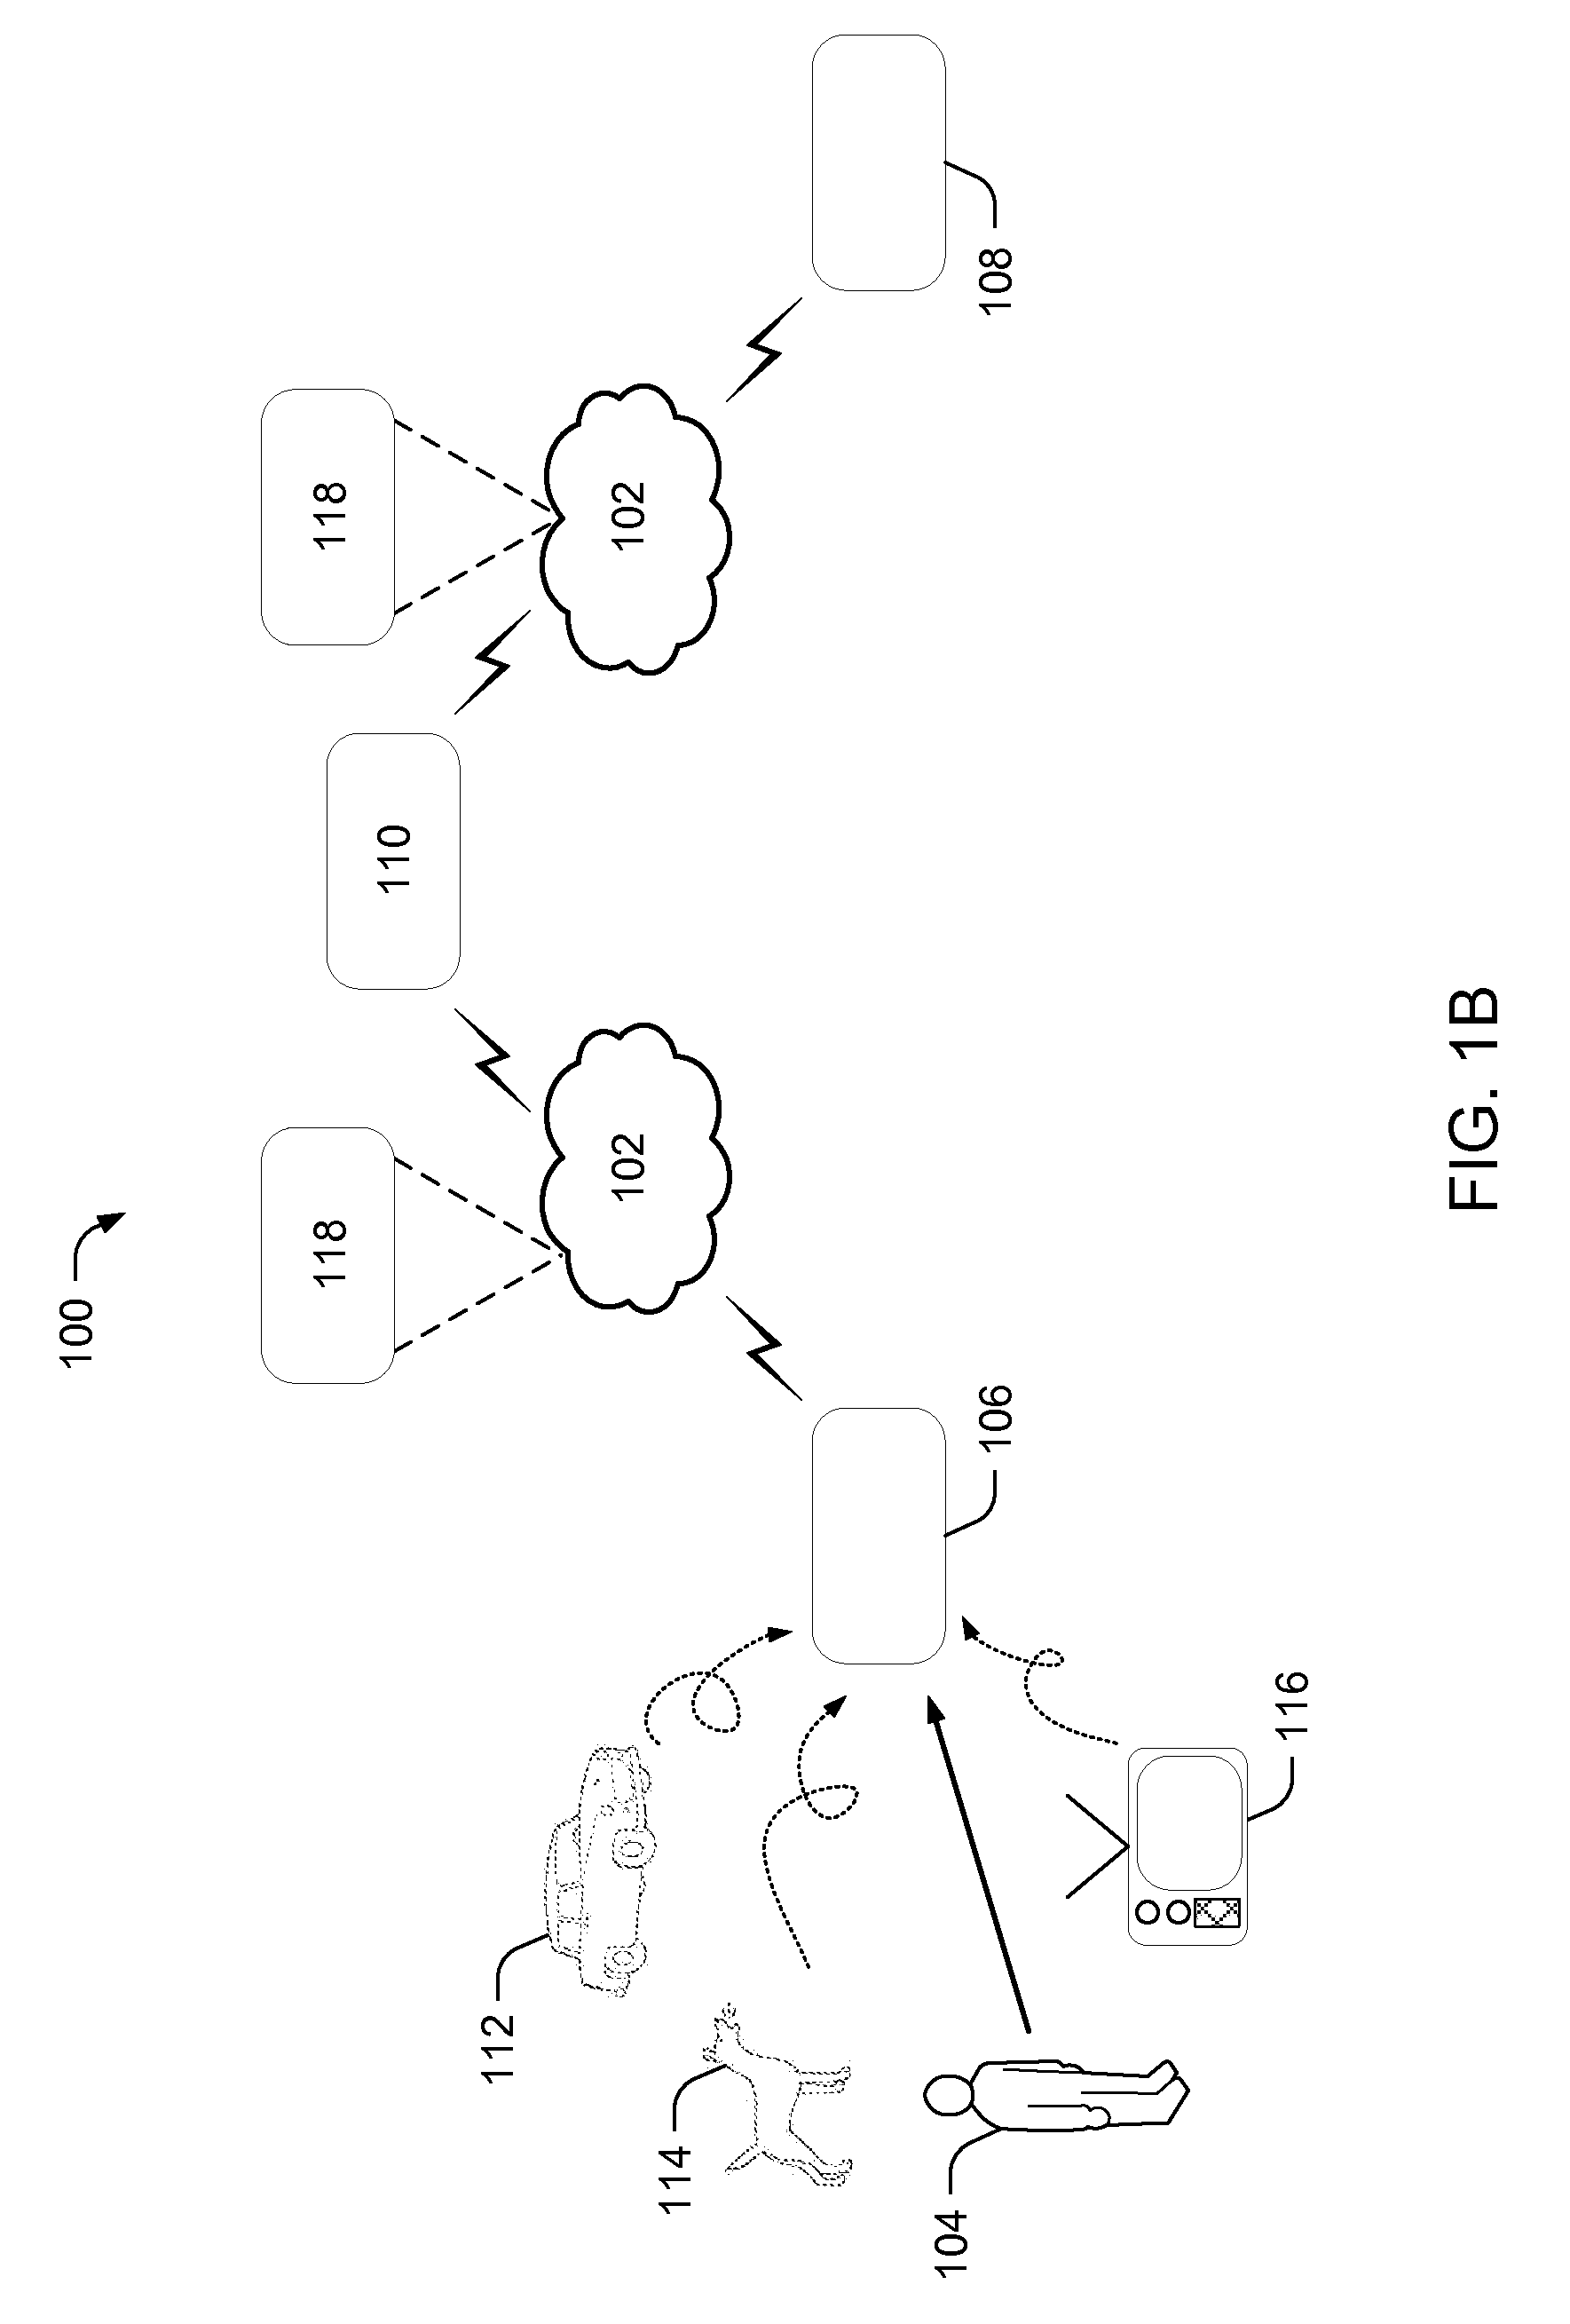 Systems and methods for noise reduction using speech recognition and speech synthesis